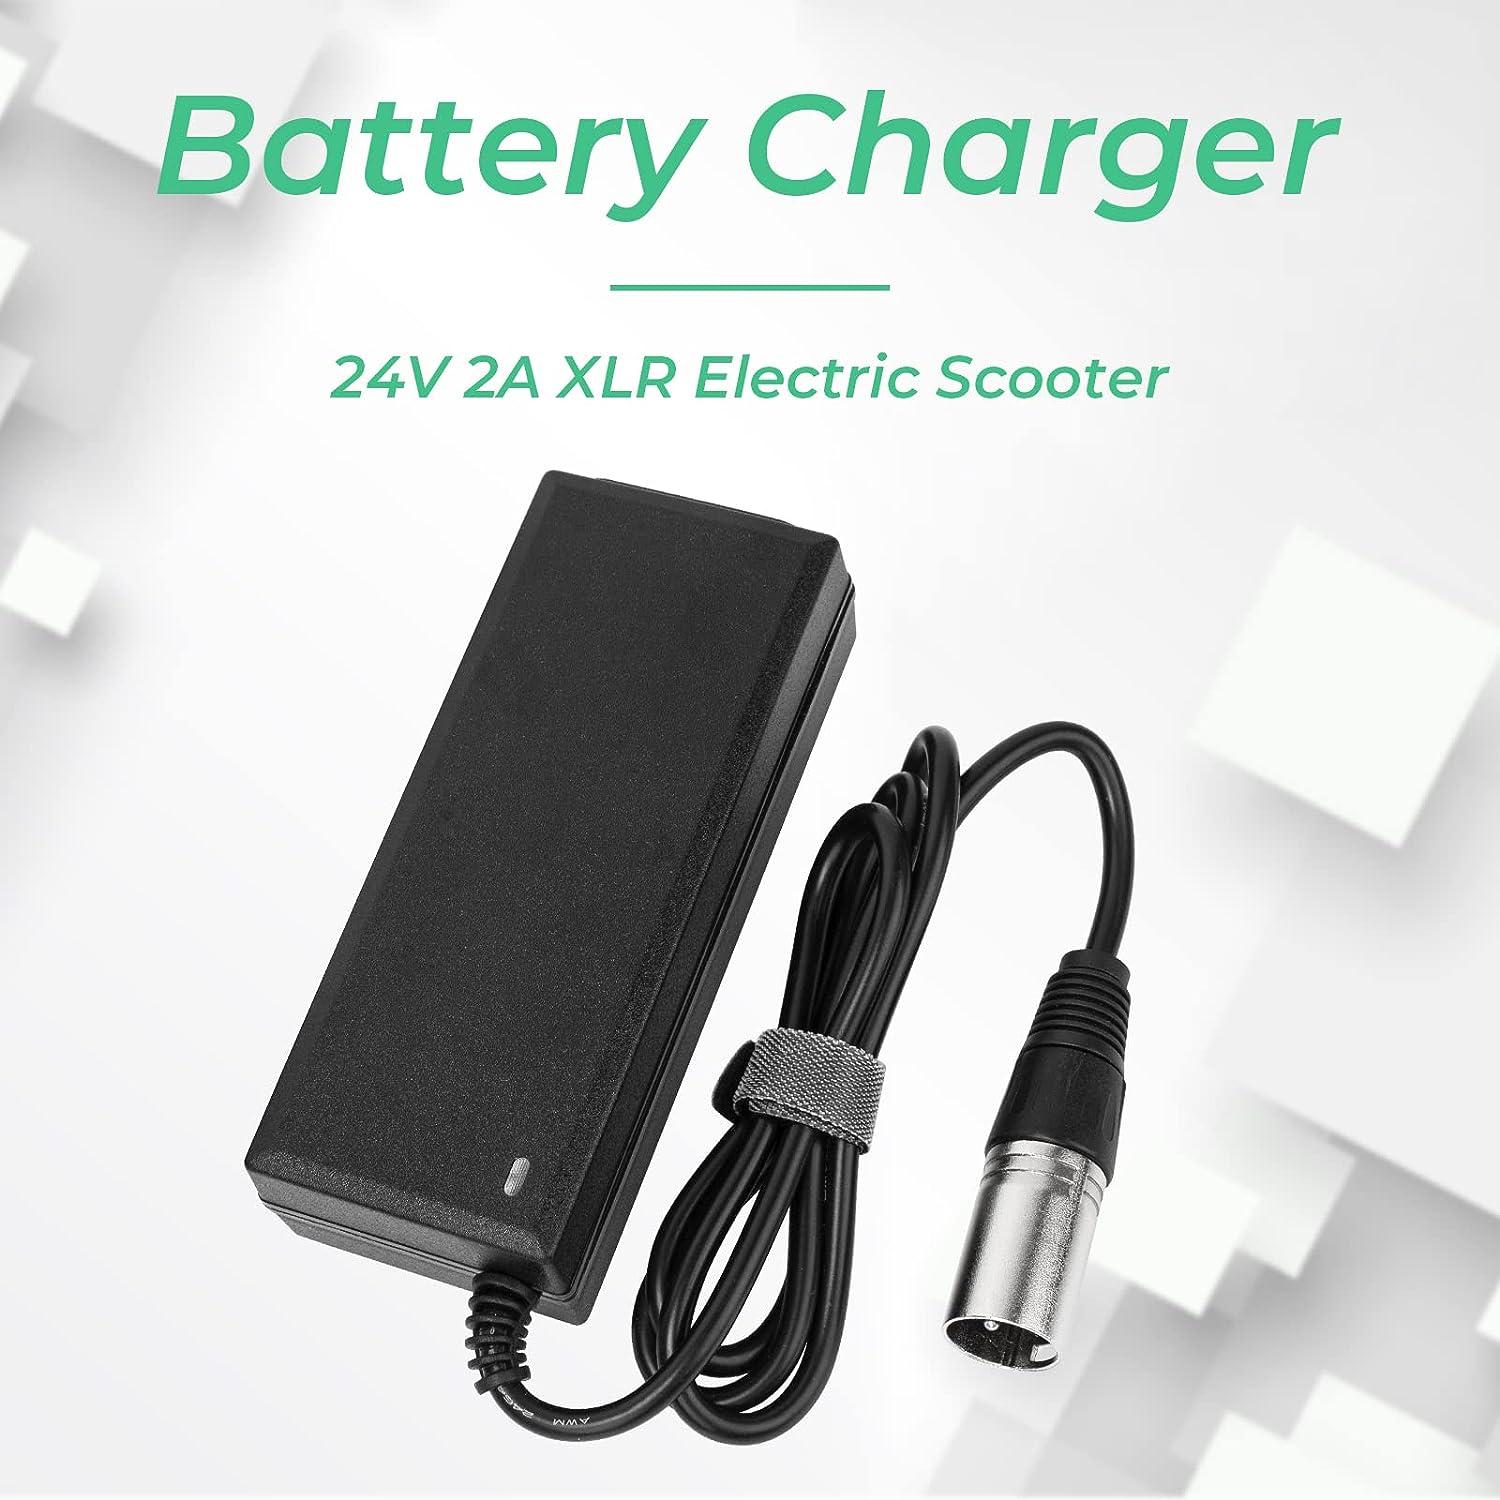 24V 2A 3-Pin XLR Connector Electronic Scooter Battery Charger for Go-Go  Elite Traveller,Pride Mobility,Jazzy Power Chair Battery Charger & Plus  Ezip Mountain Trailz (with 3.9ft US Power Cord )